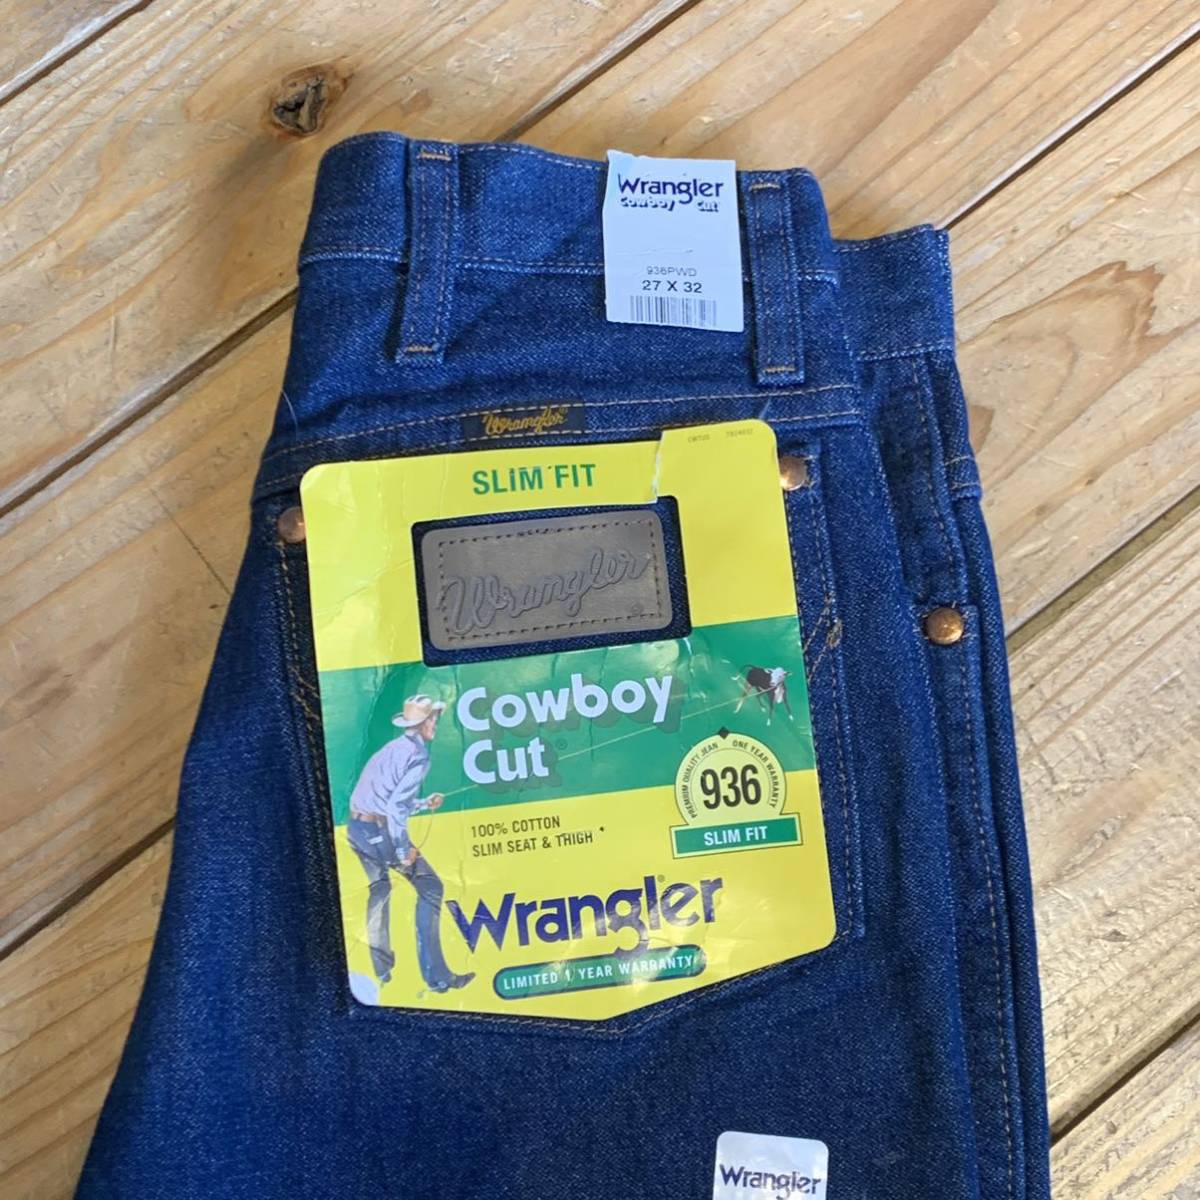  new goods Wrangler Wrangler Denim jeans men's W27L32 indigo American Casual outdoor old clothes America buying up tag attaching unused goods P1178